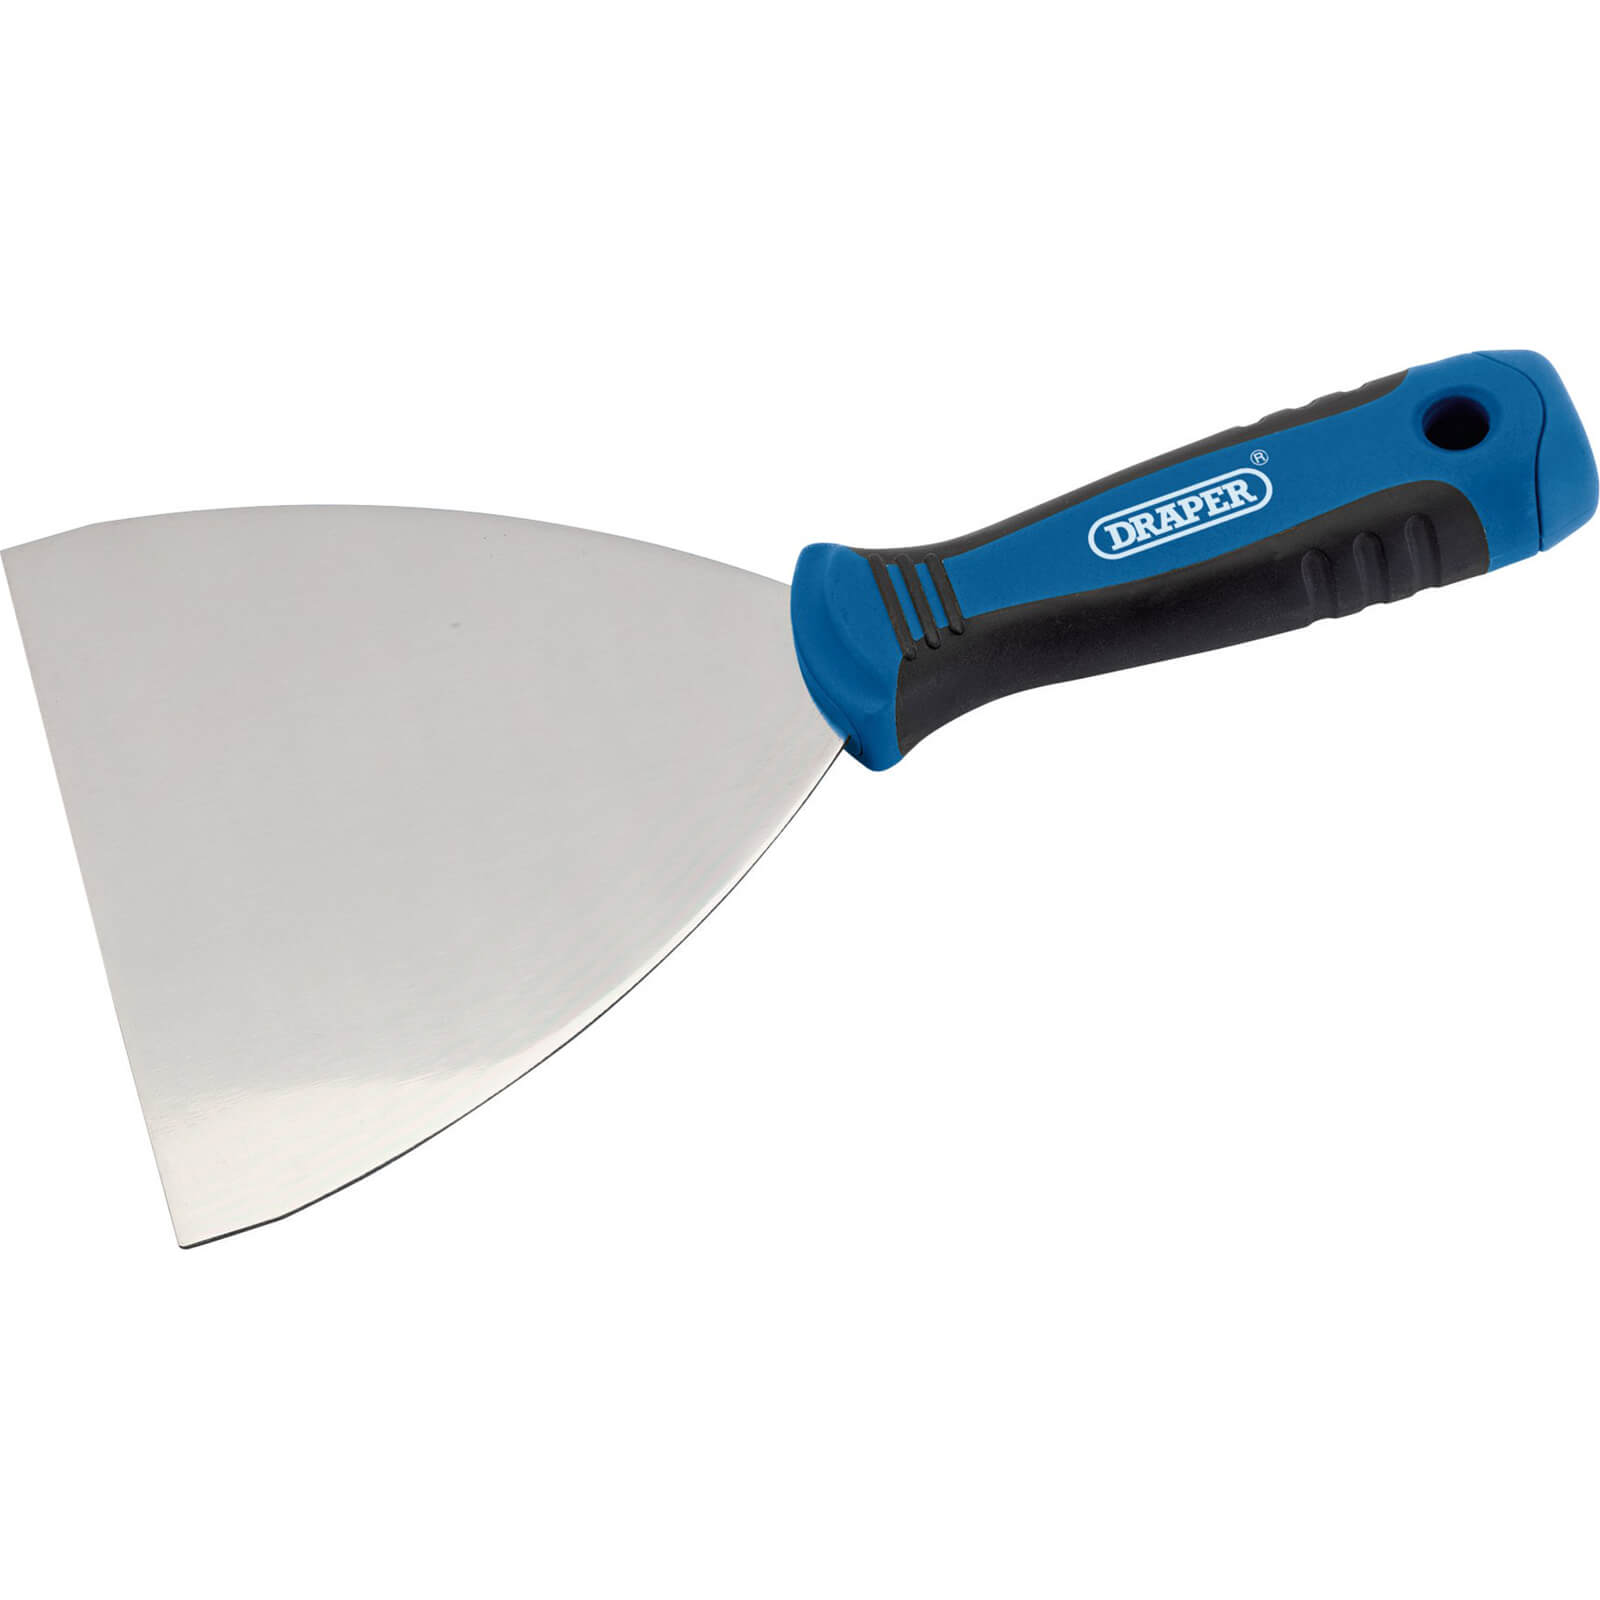 Image of Draper Soft Grip Stripping Knife 125mm